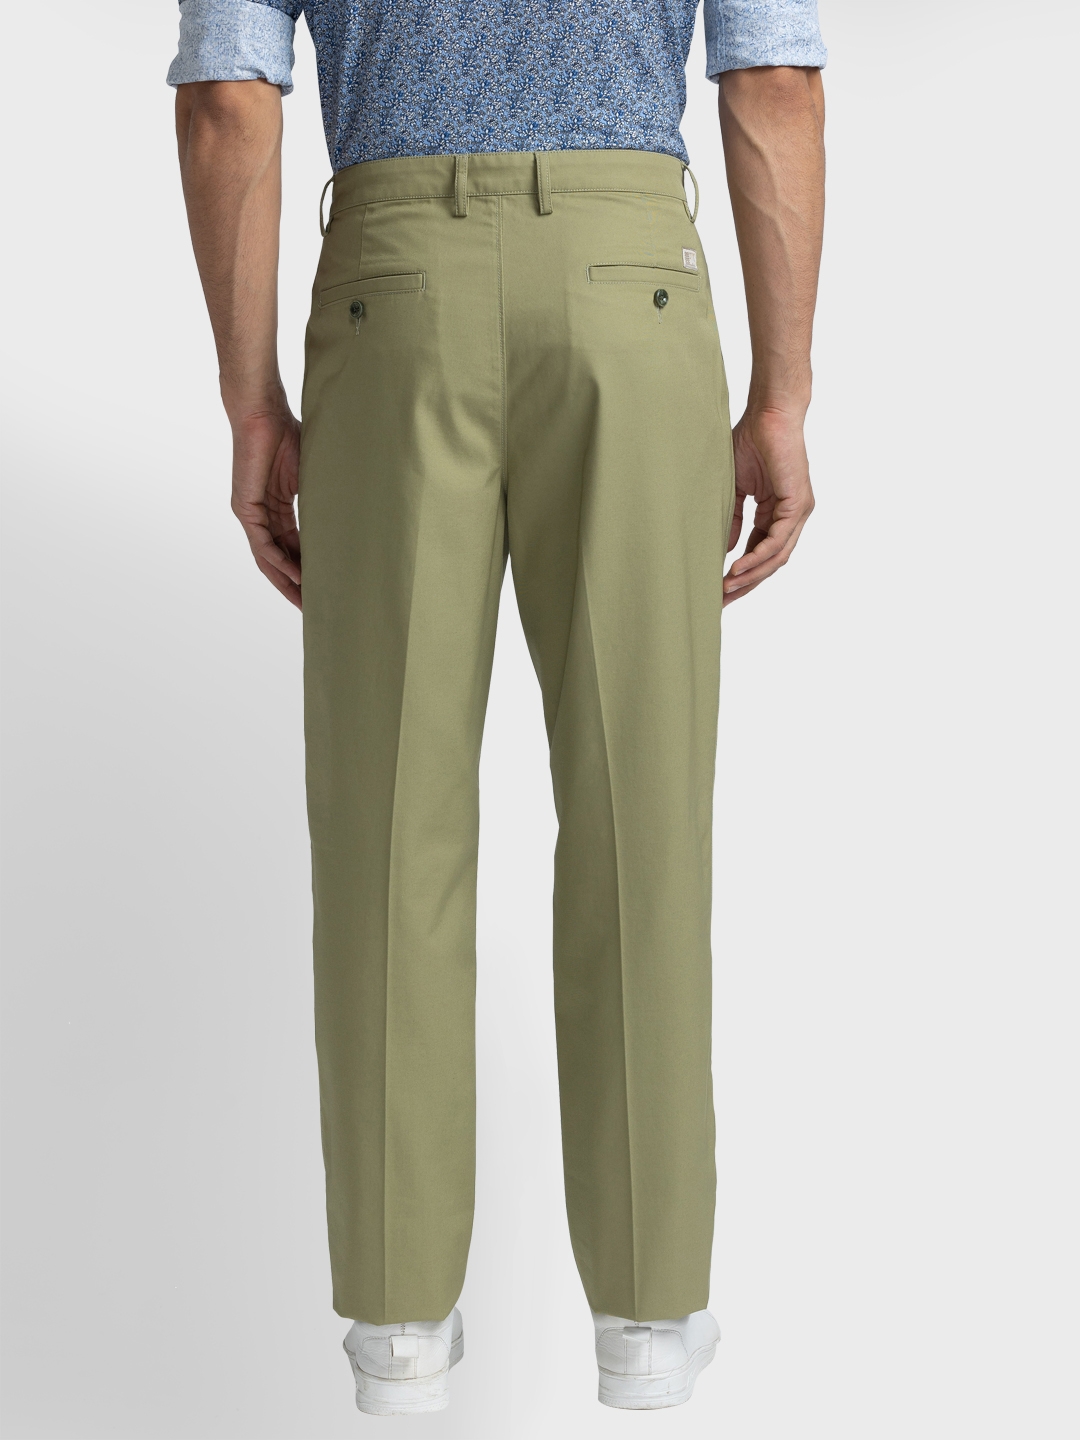 Colorplus Trousers - Buy Colorplus Trousers online in India